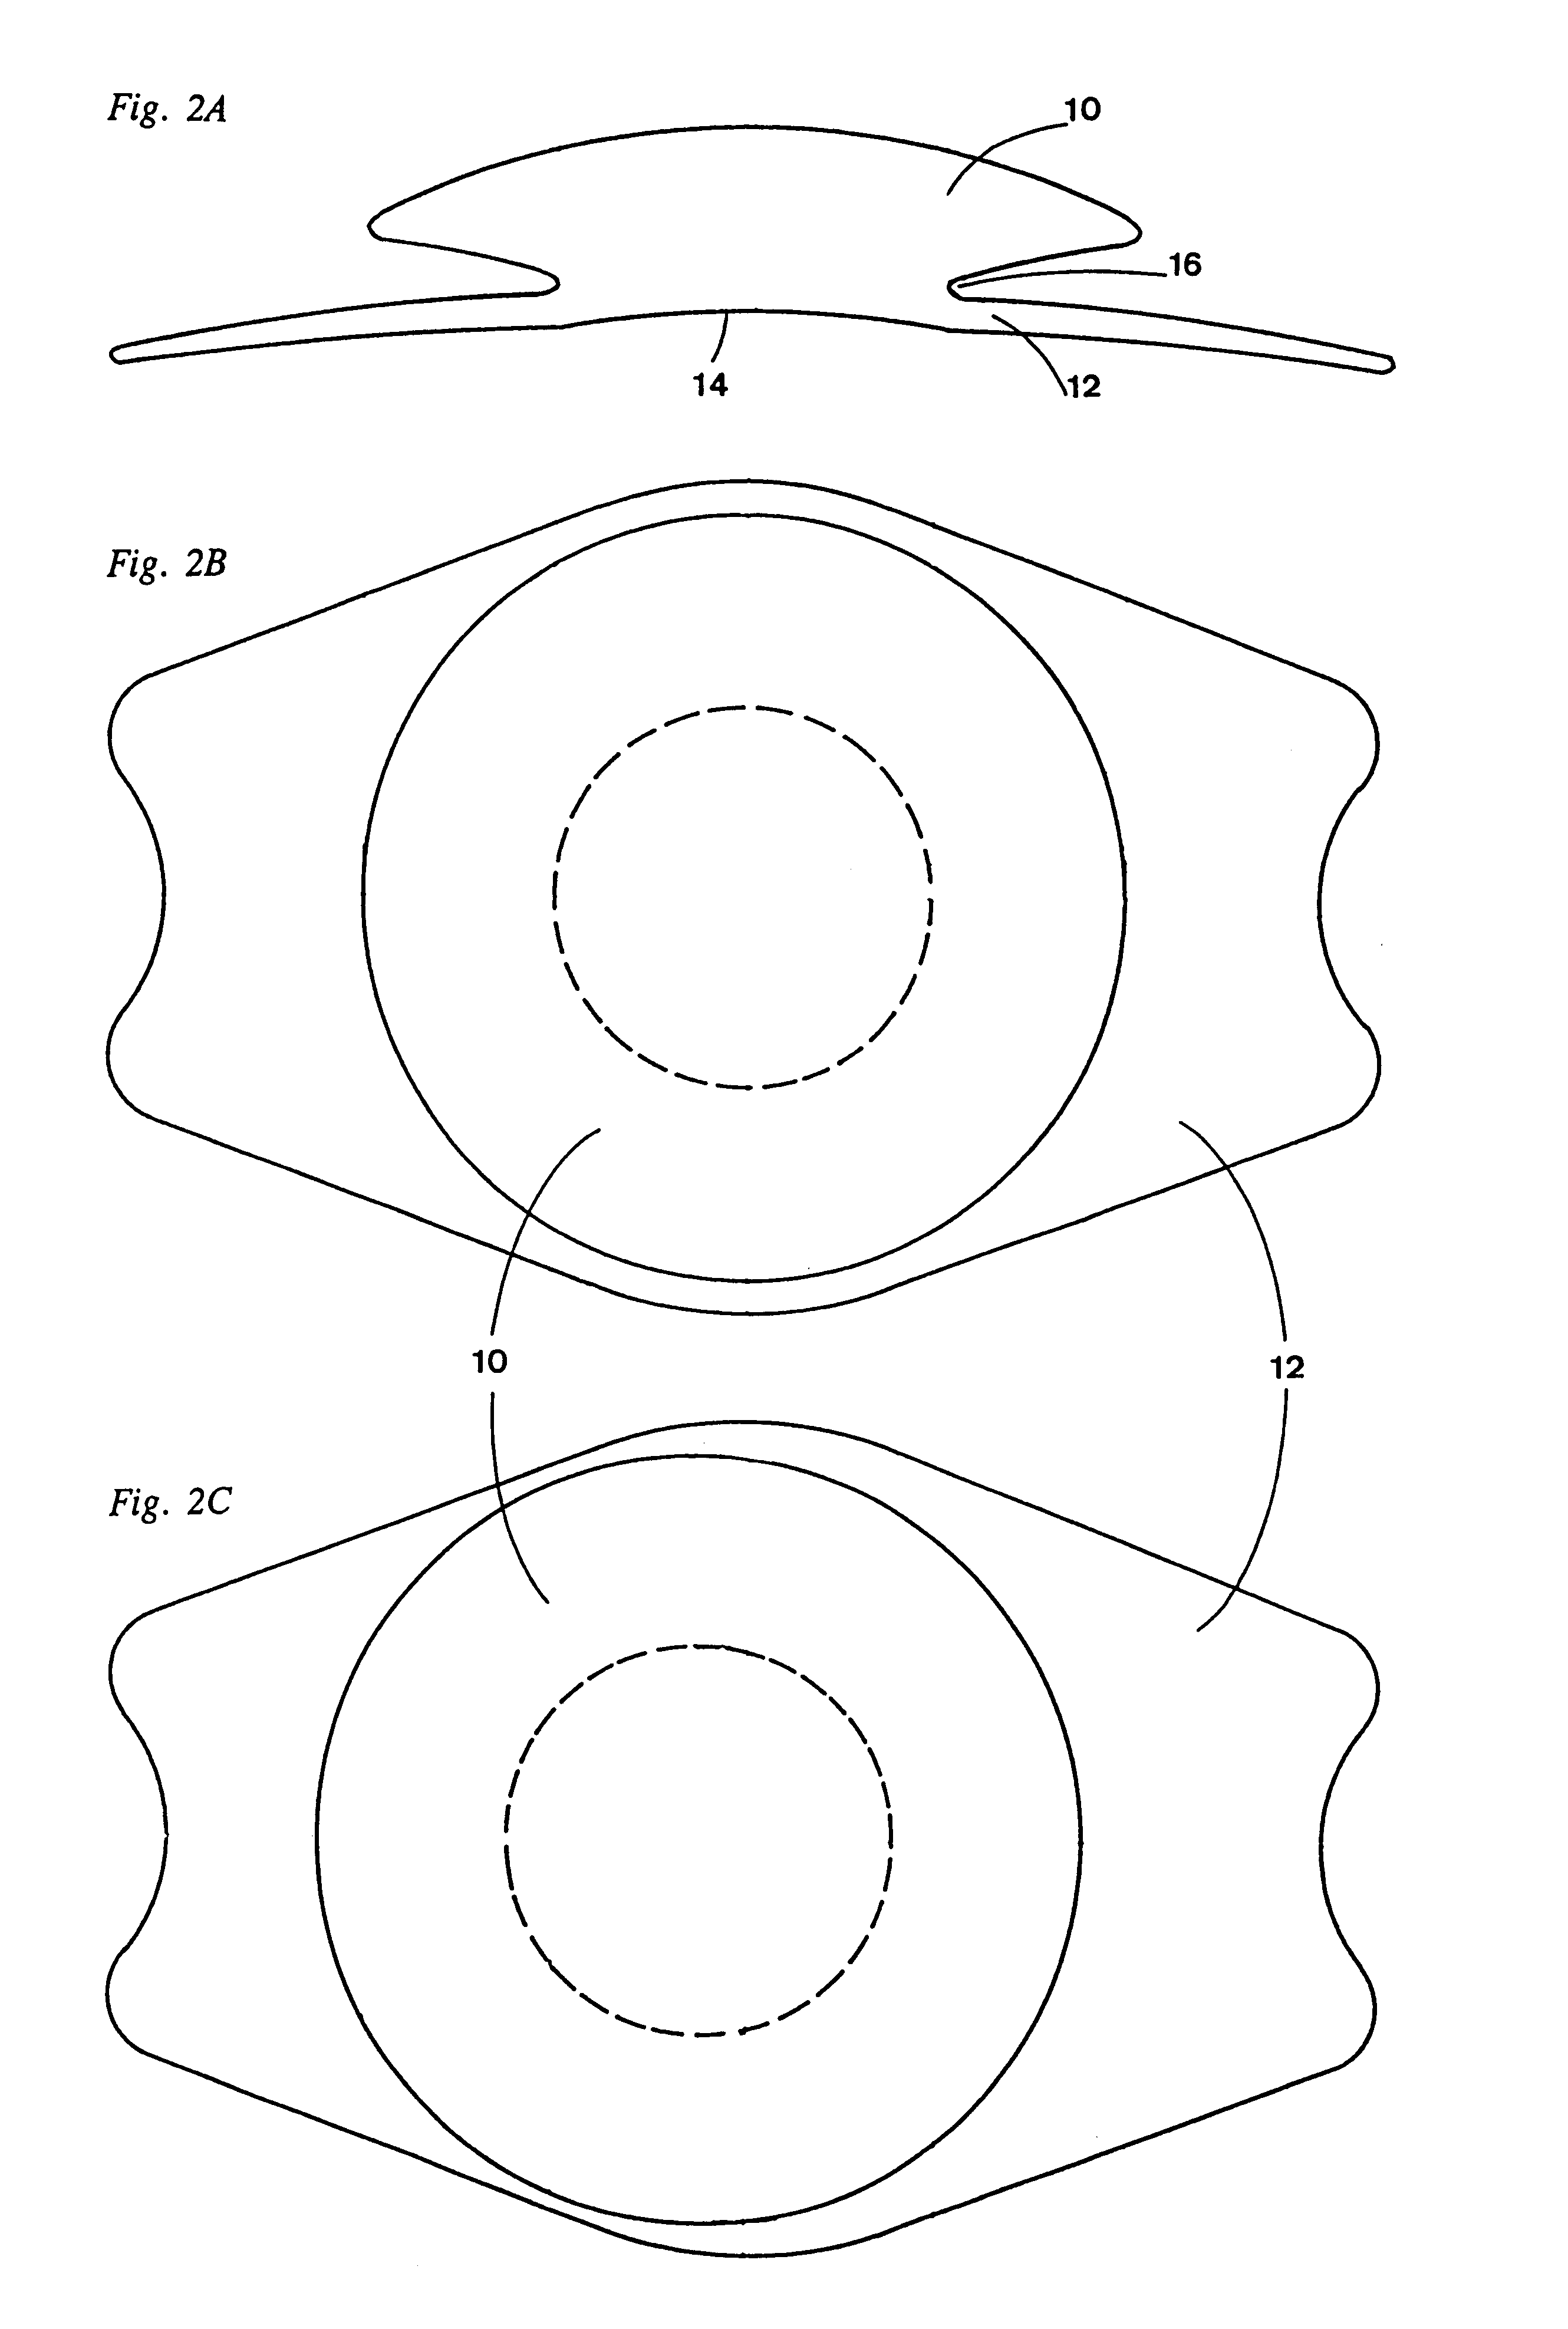 Intraocular lens with accommodative properties